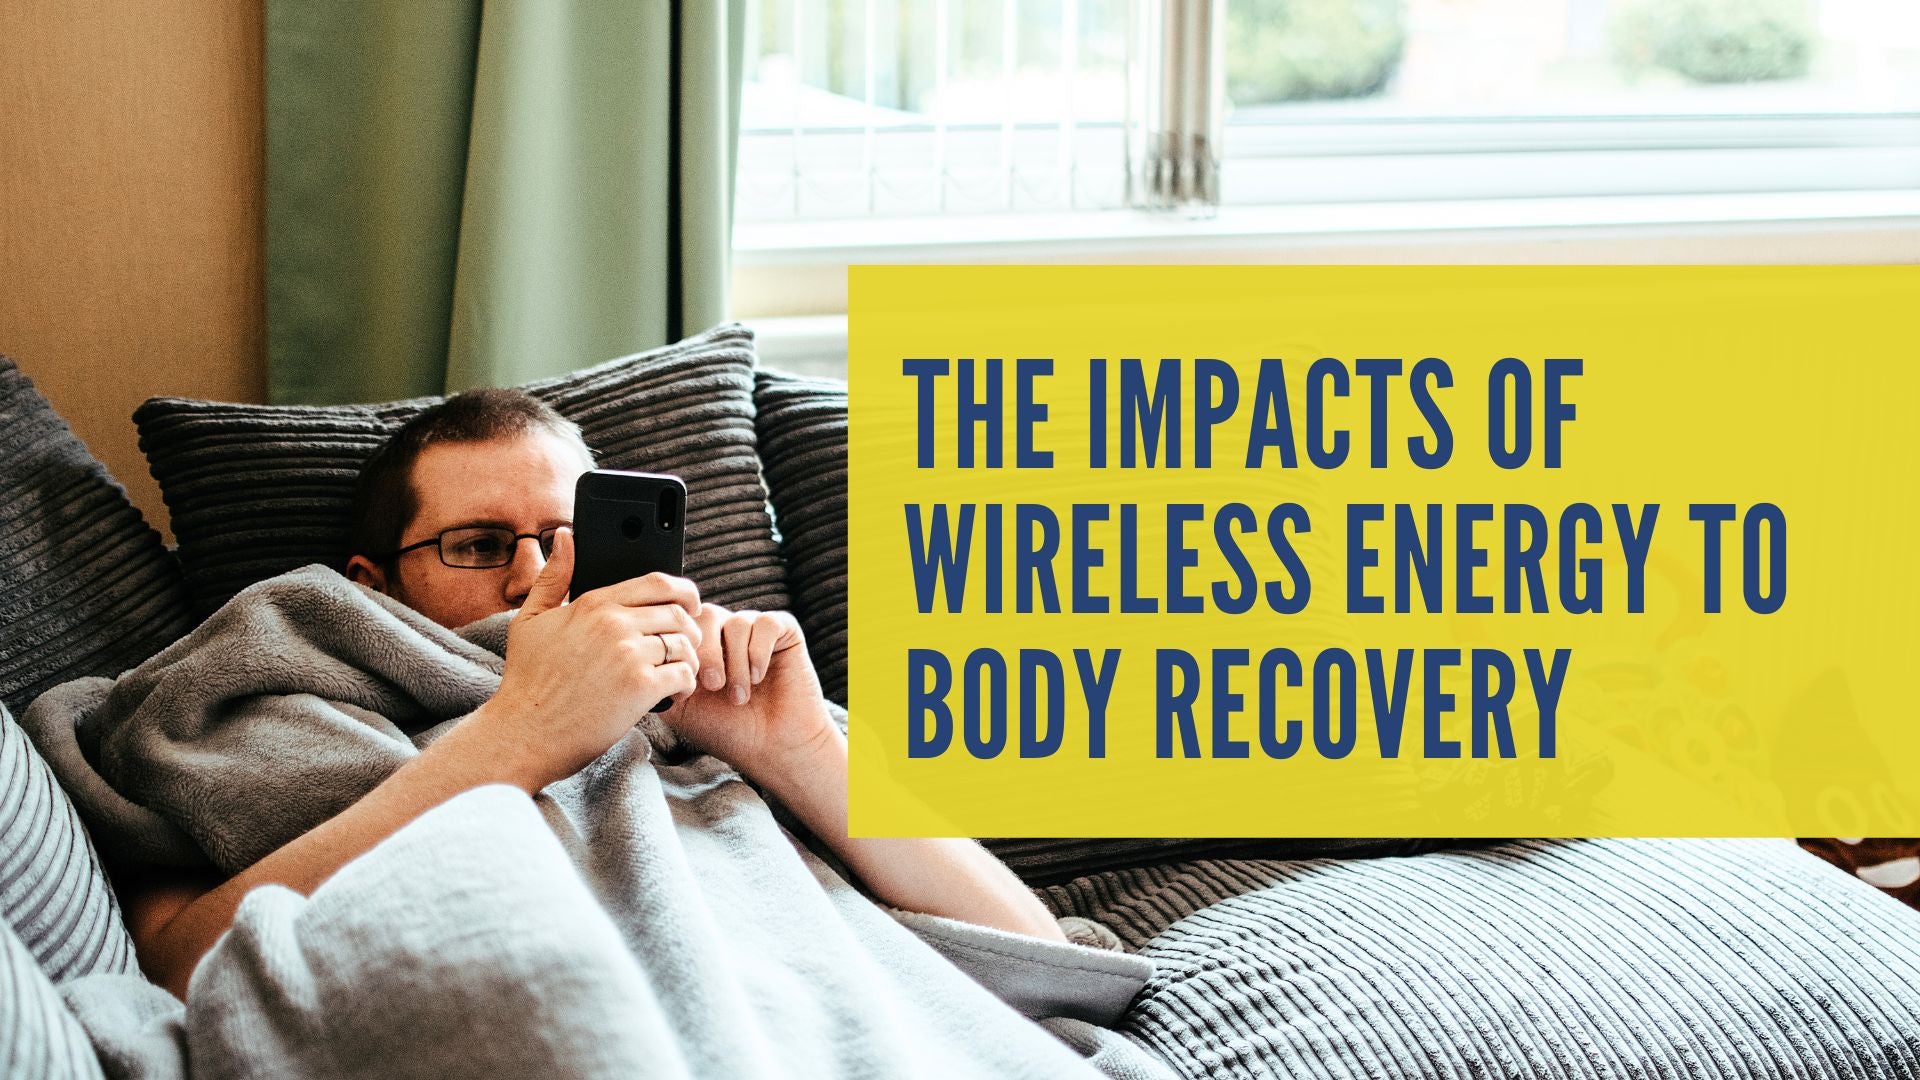 How EMF Radiation Impacts Body Recovery